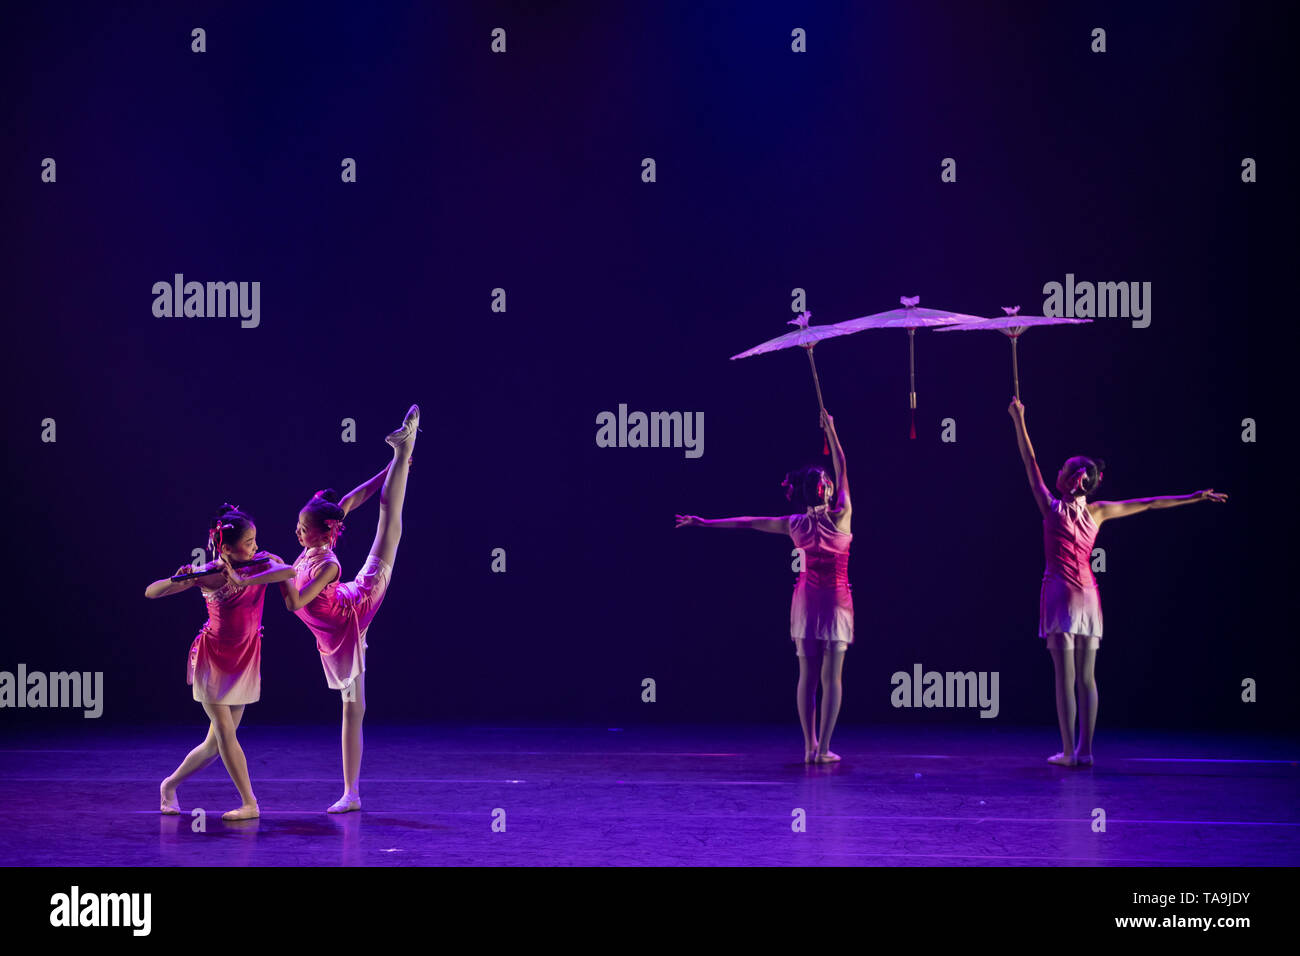 Beijing, Finland. 21st May, 2019. Children from the Nanjing Little Red Flower Art Troupe of China perform at the Alexander Theatre in Helsinki, Finland, May 21, 2019. Credit: Matti Matikainen/Xinhua/Alamy Live News Stock Photo